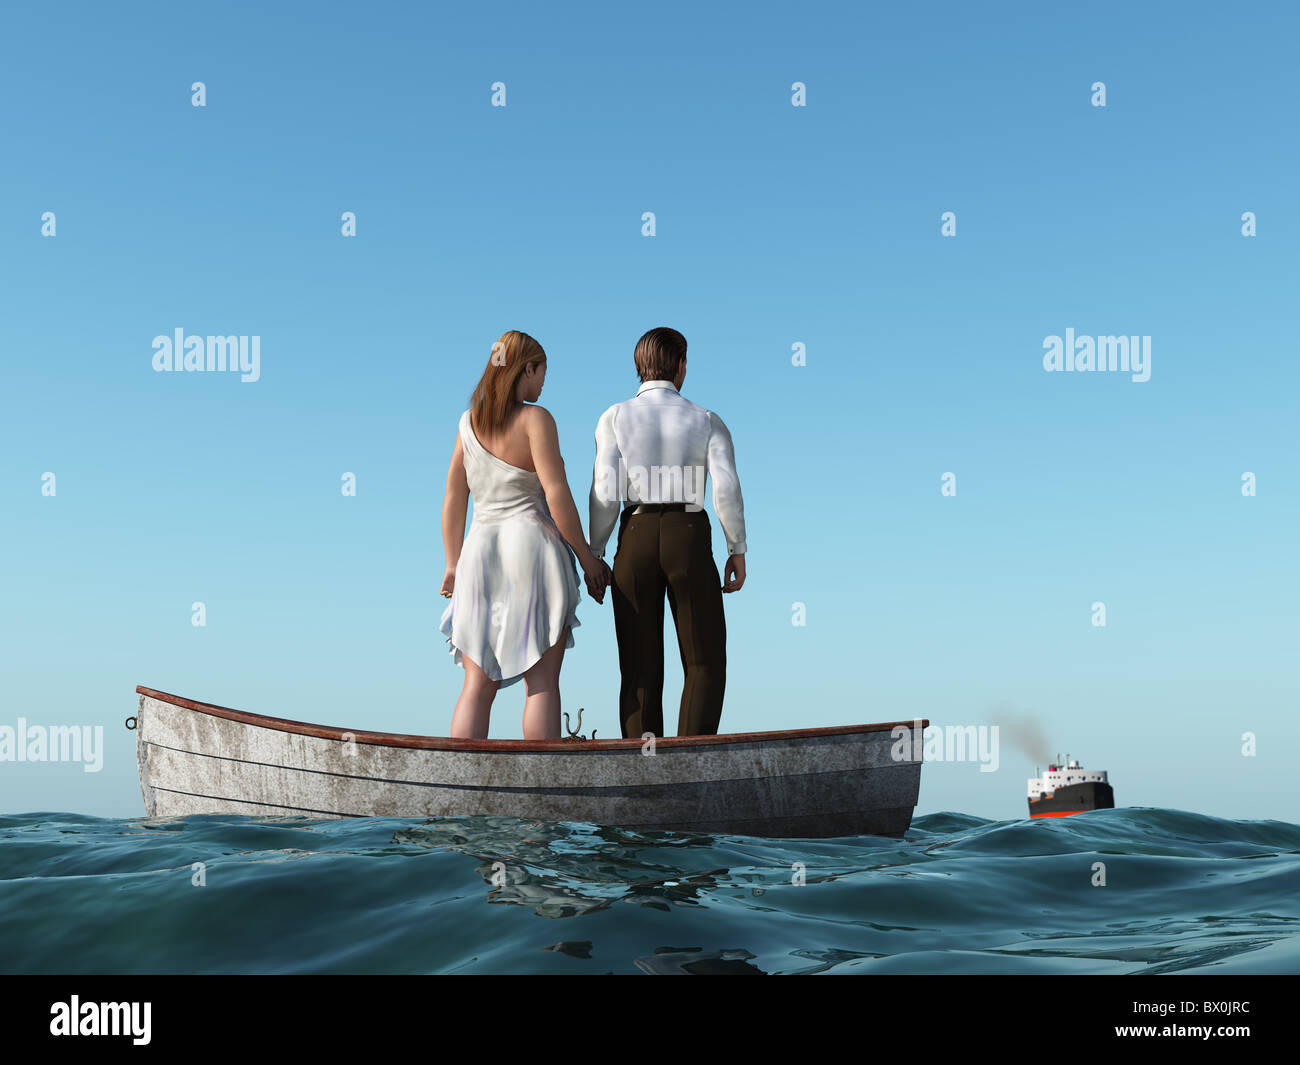 man and woman drifting in a boat Stock Photo